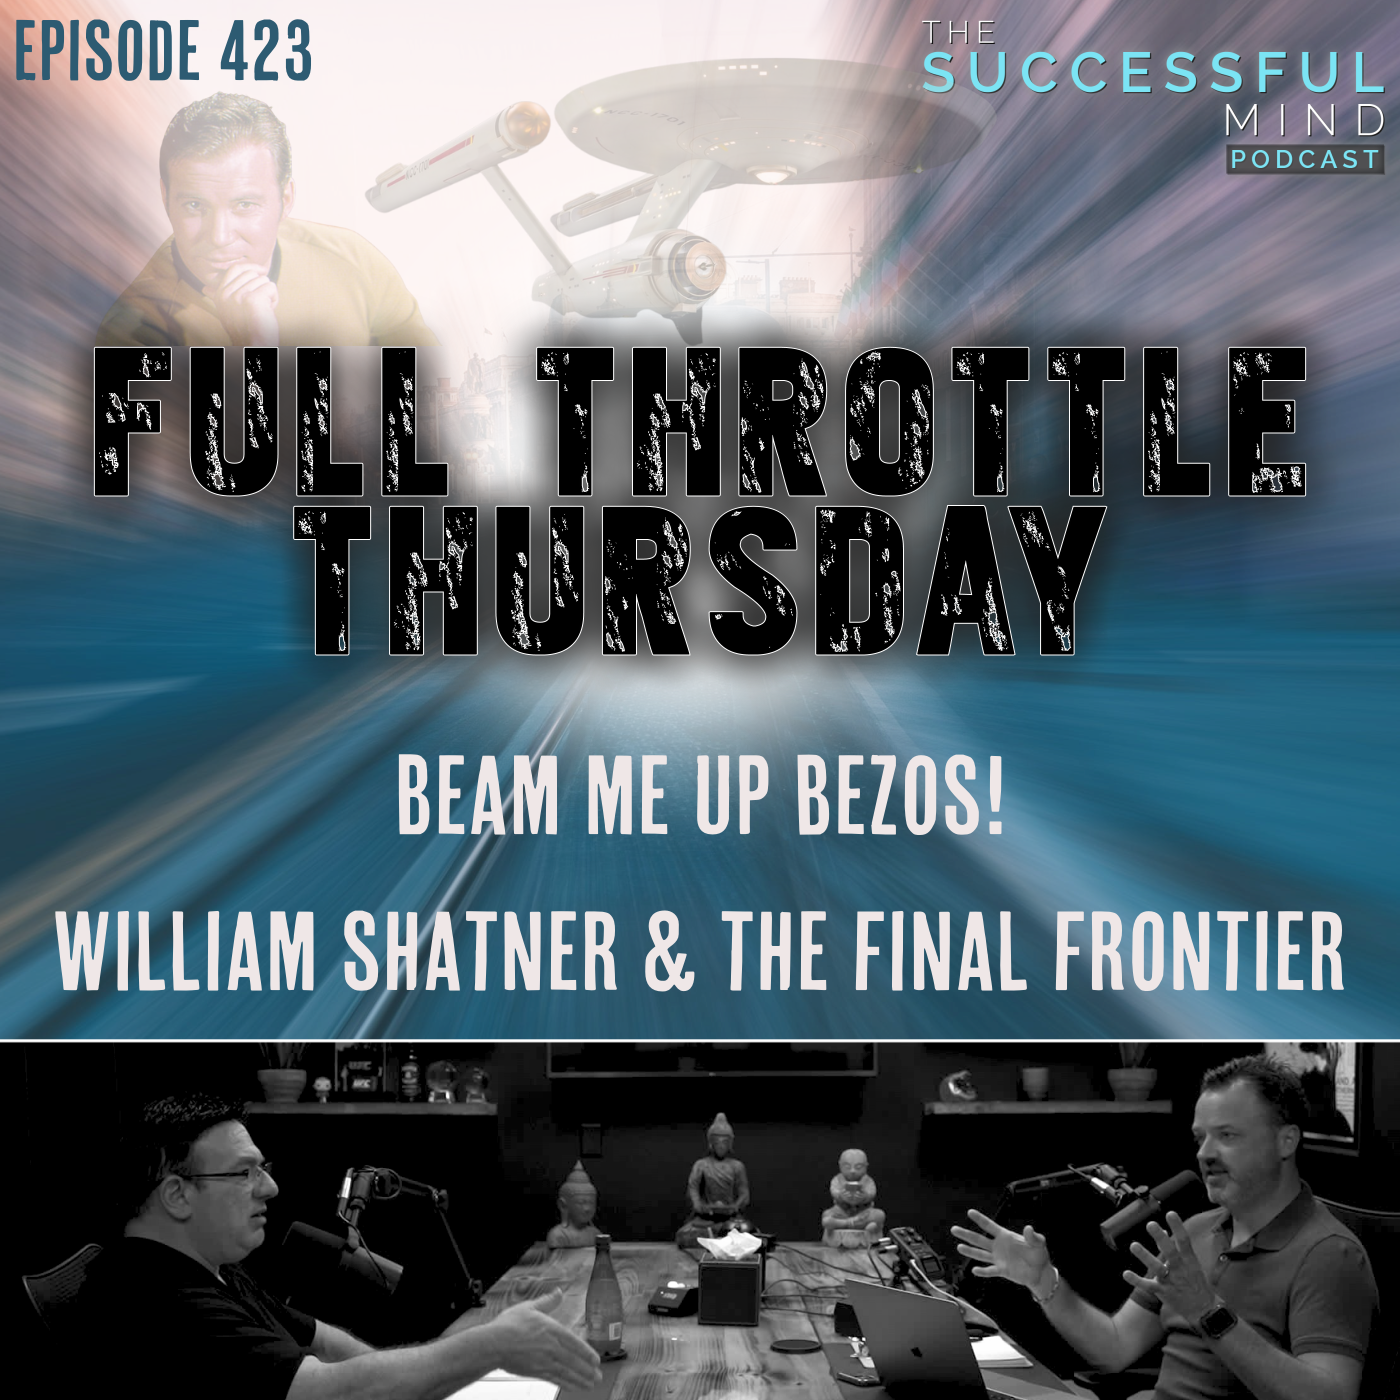 The Successful Mind Podcast - Full Throttle Thursday - William Shatner & The Final Frontier